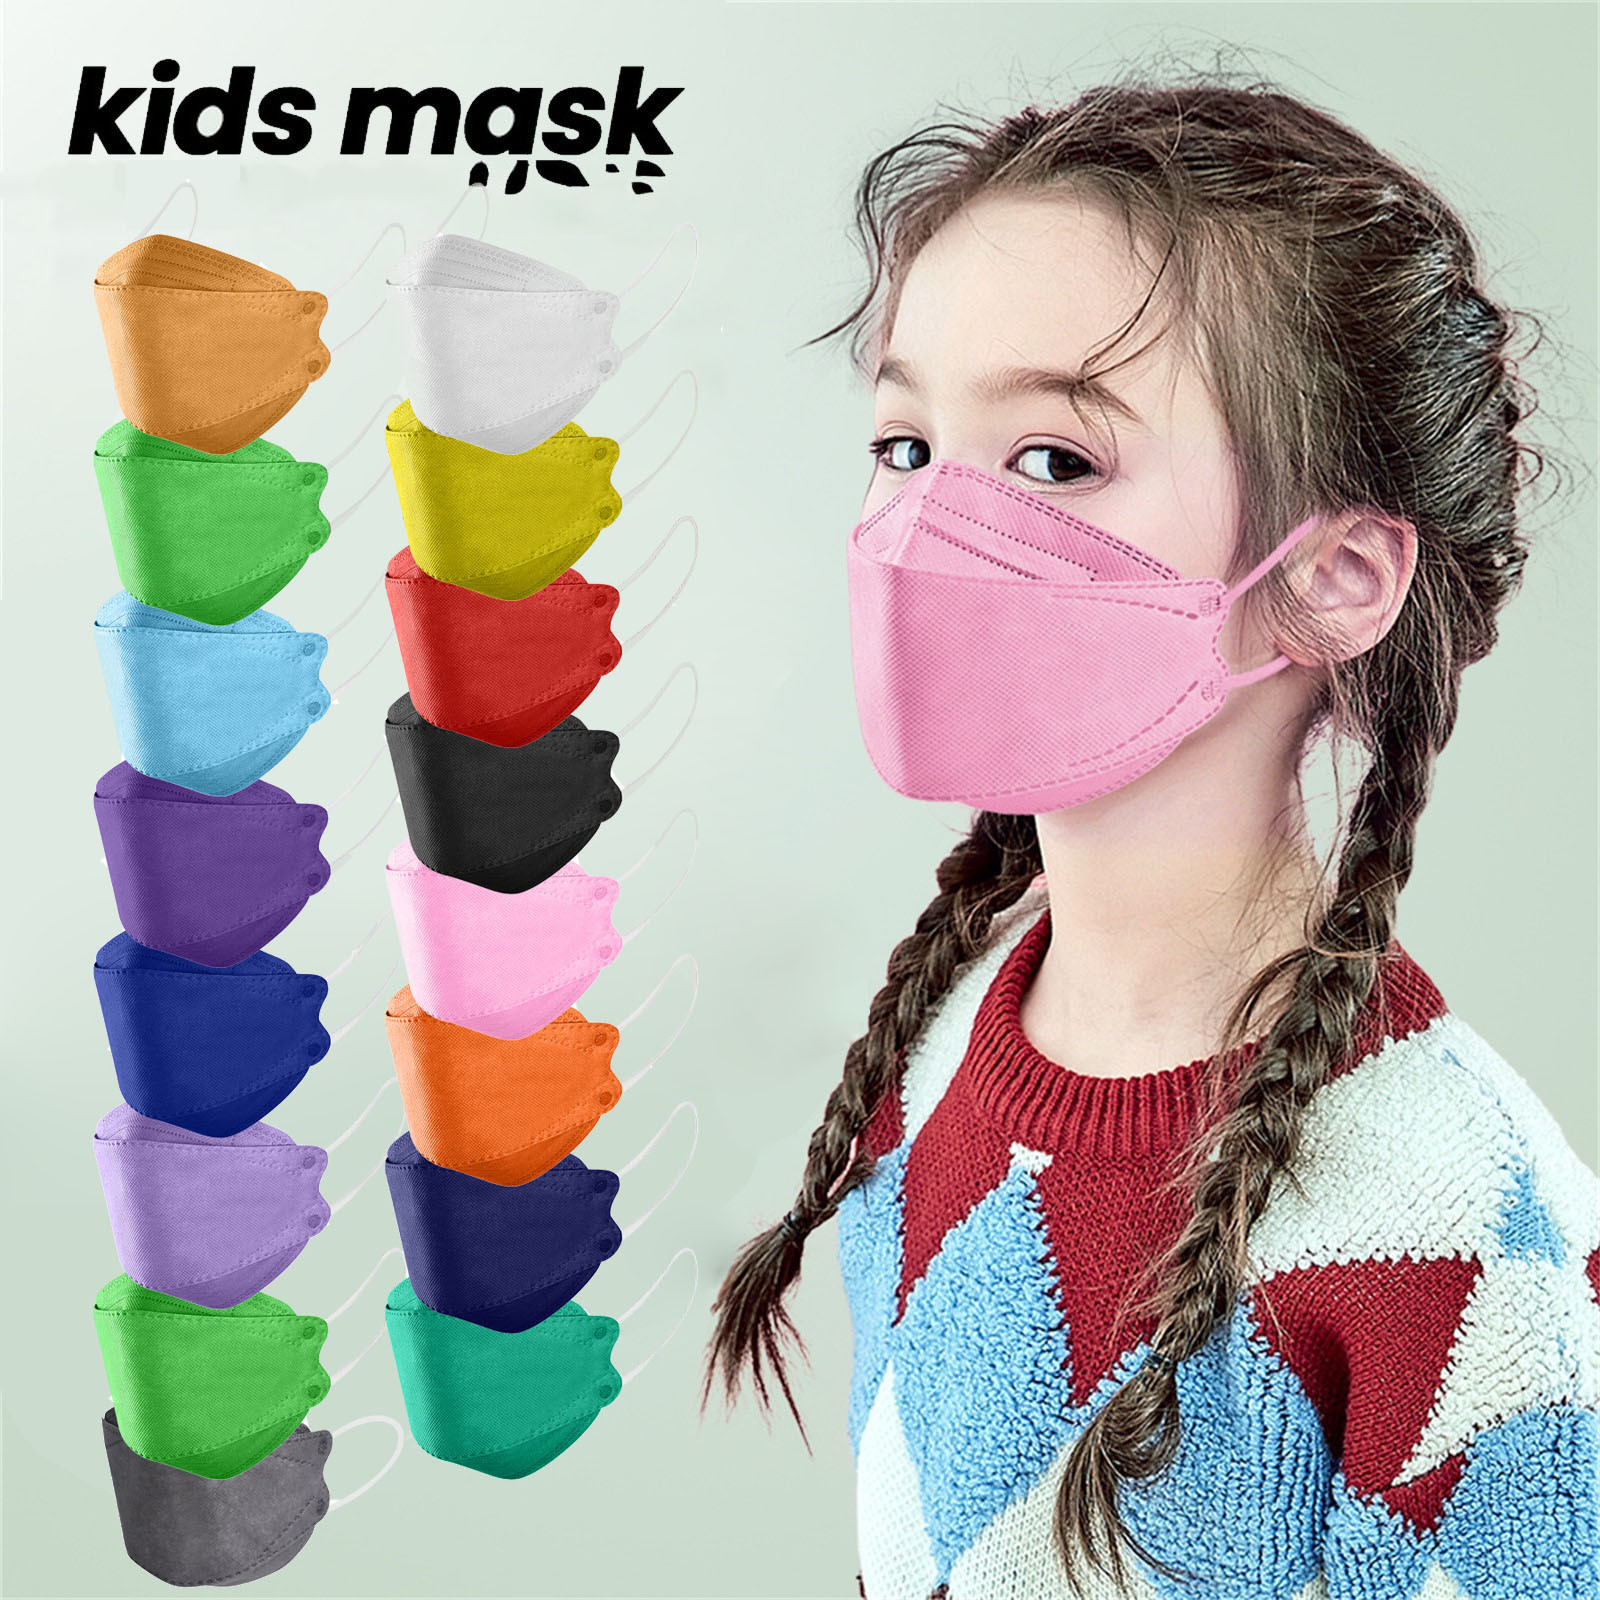 

kn95 child kids disposable face mask nonwoven 5 layers of protection dustproof student children mask outdoor masks maschera facciale